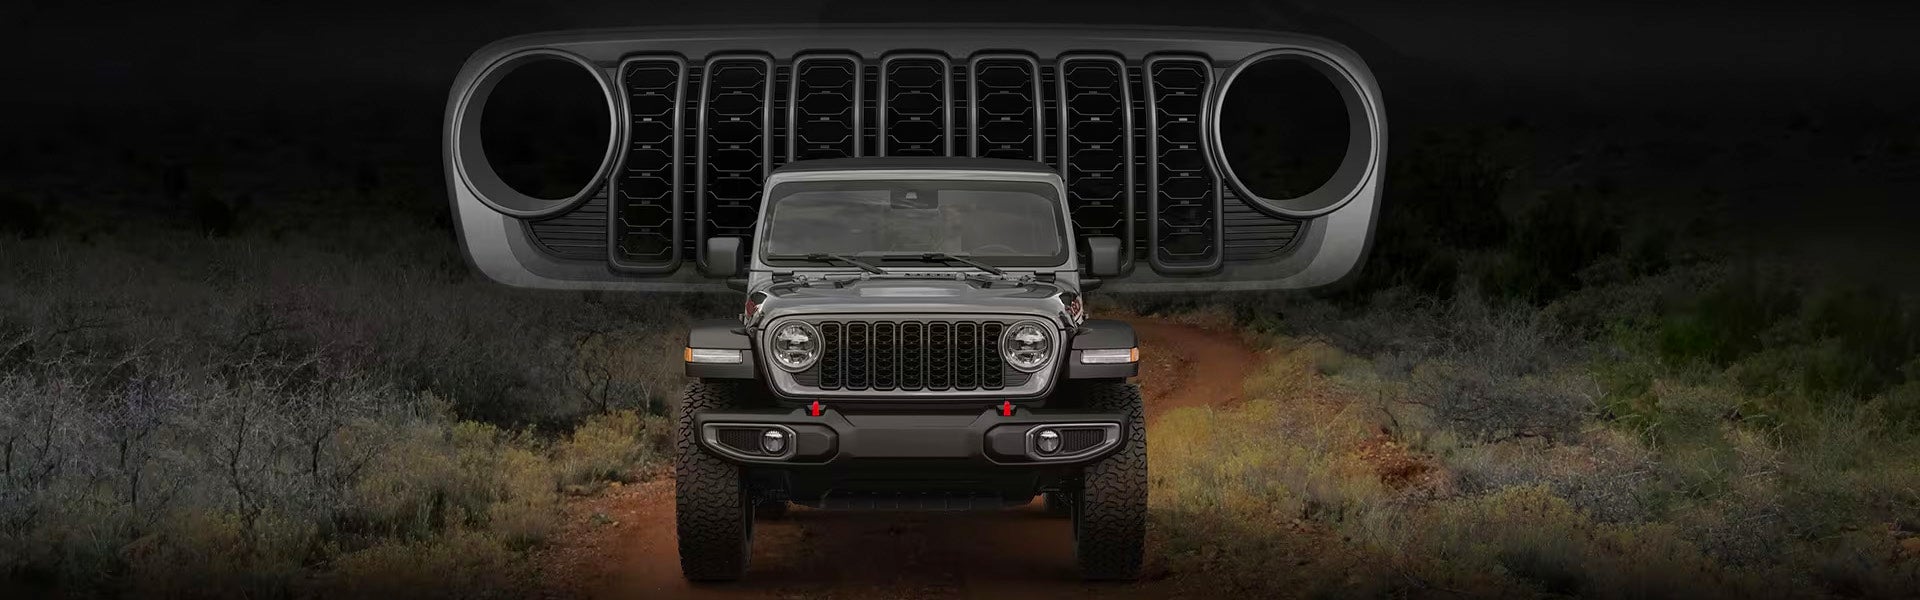 An image of the Jeep Wrangler front dashboard